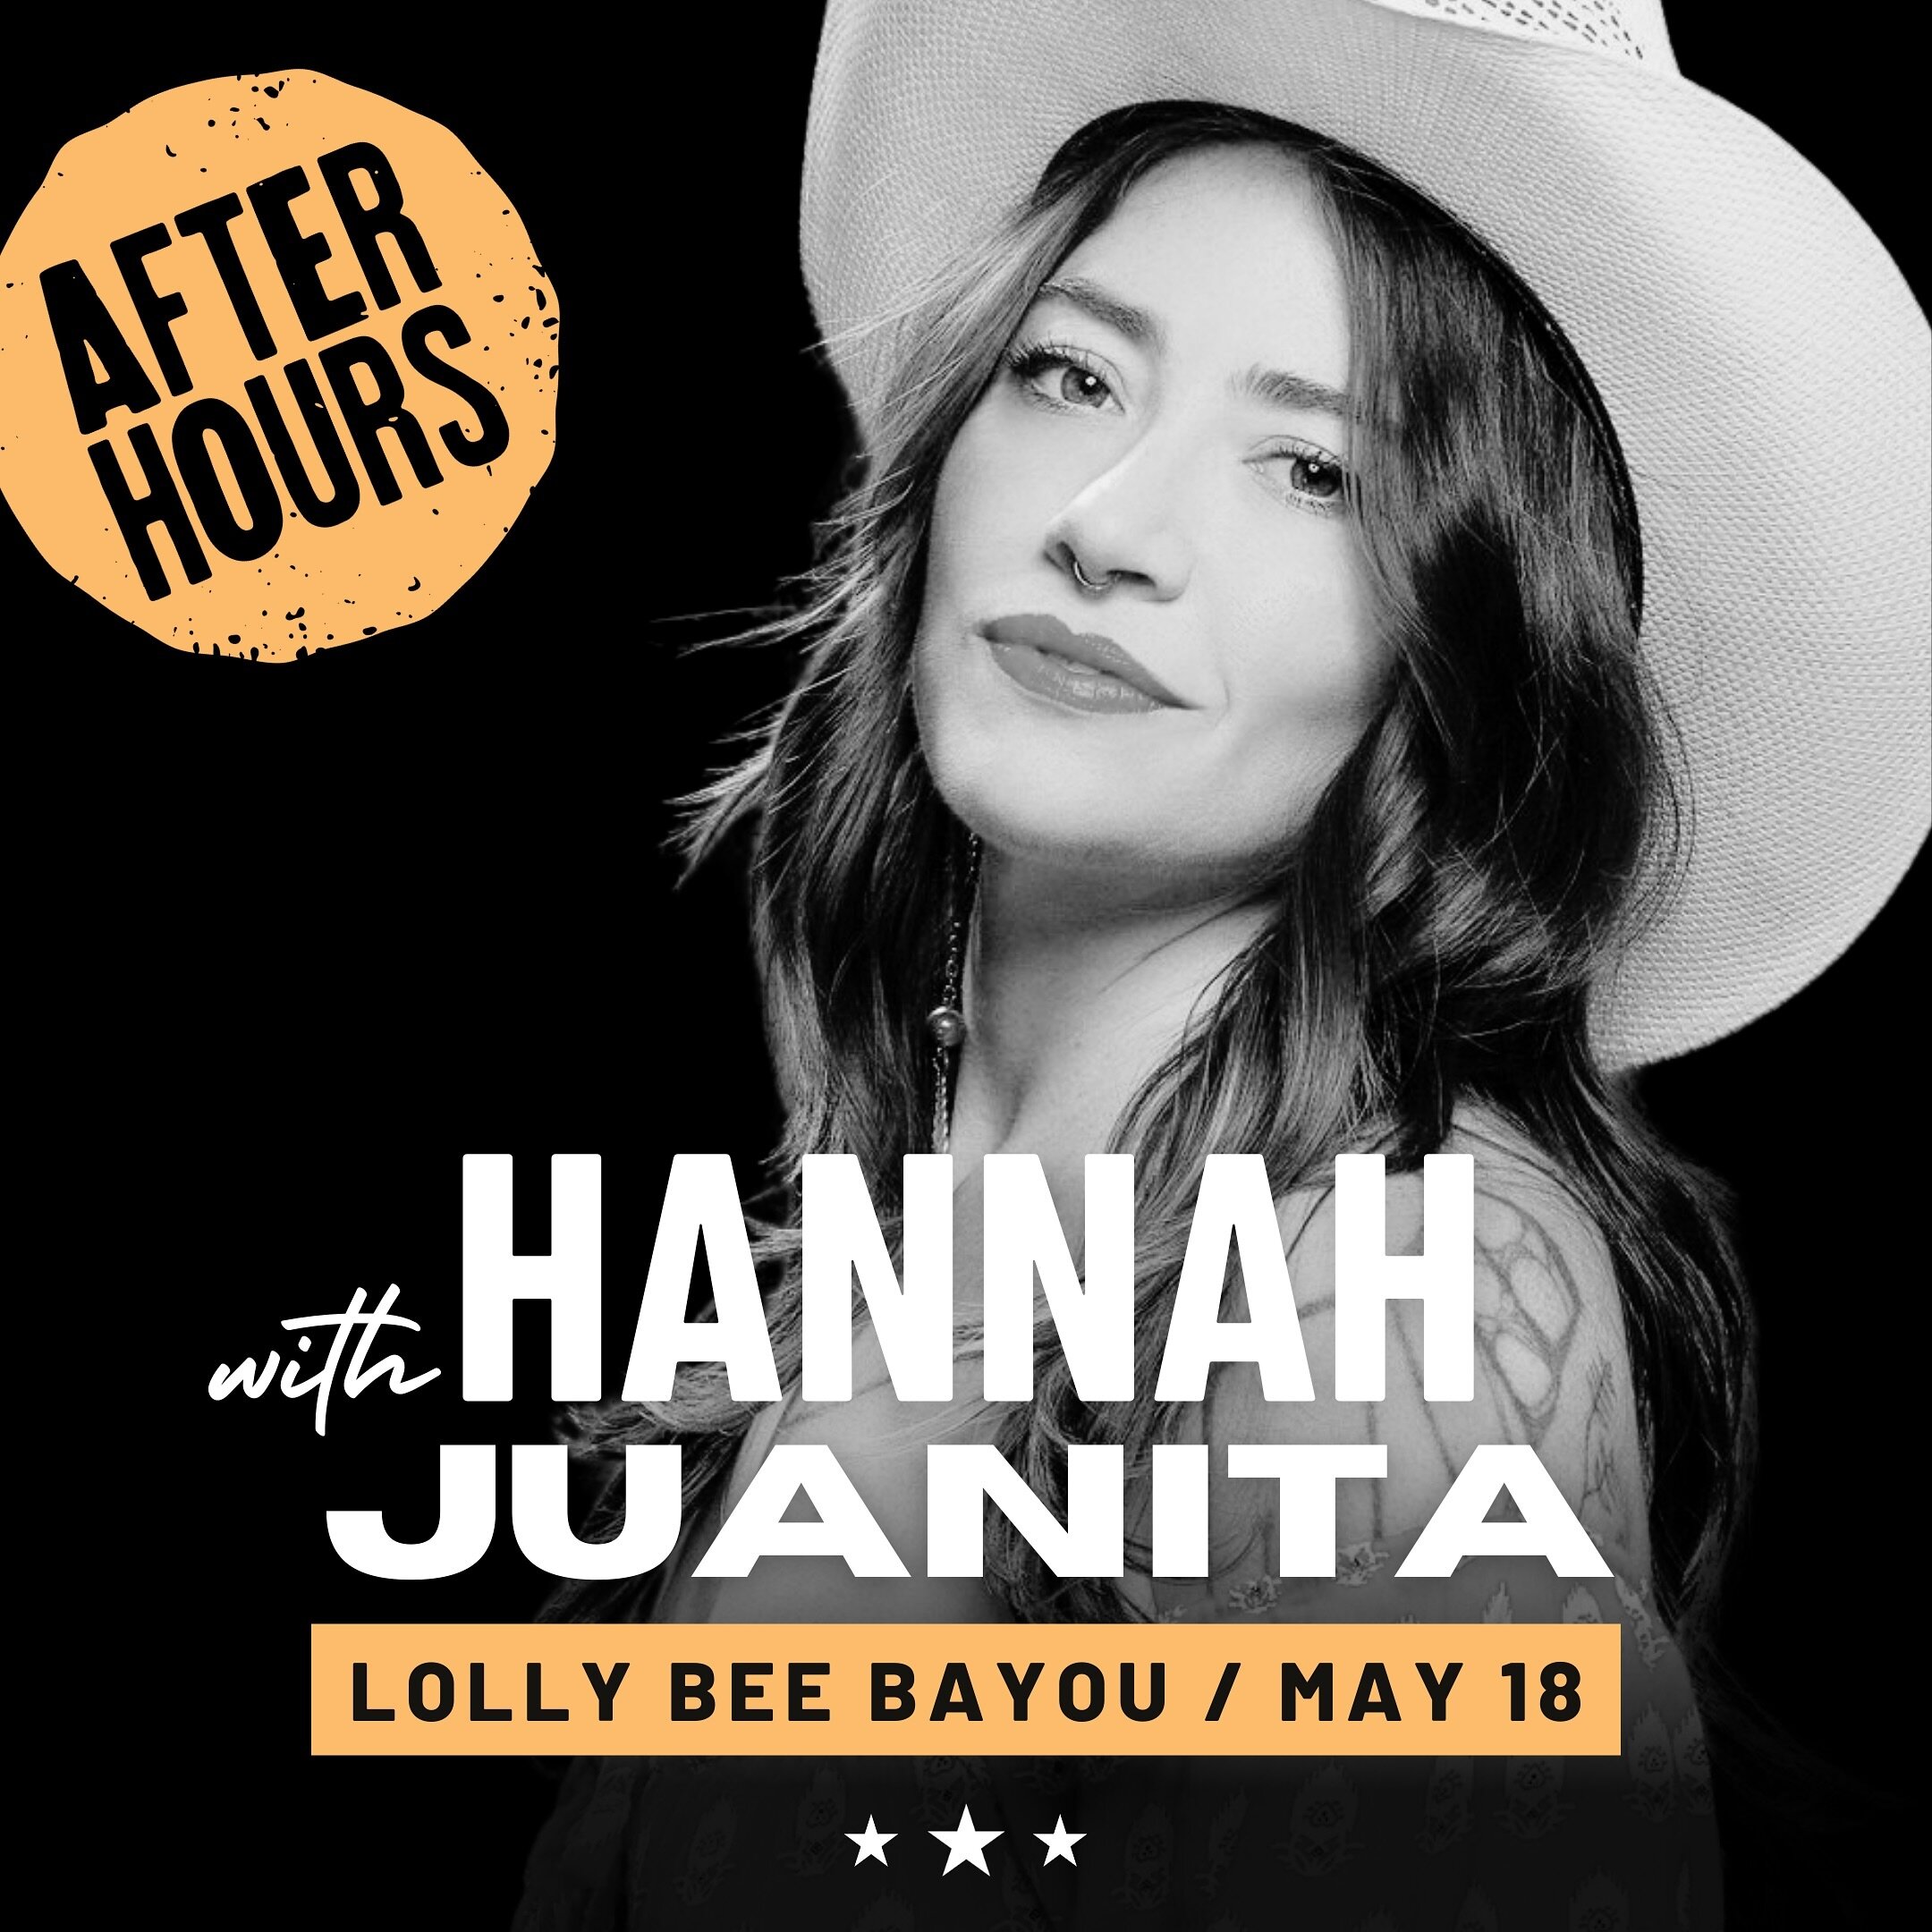 Sound the brays, Walnut is passing over her crown once again - May 18th only - to the new Queen of the Bayou, Hannah Juanita! 👸🏻🐊 We cannot WAIT to have her grace our stage with her sweet lil bayou lovin&rsquo; honky tonk heart!

Don&rsquo;t miss 